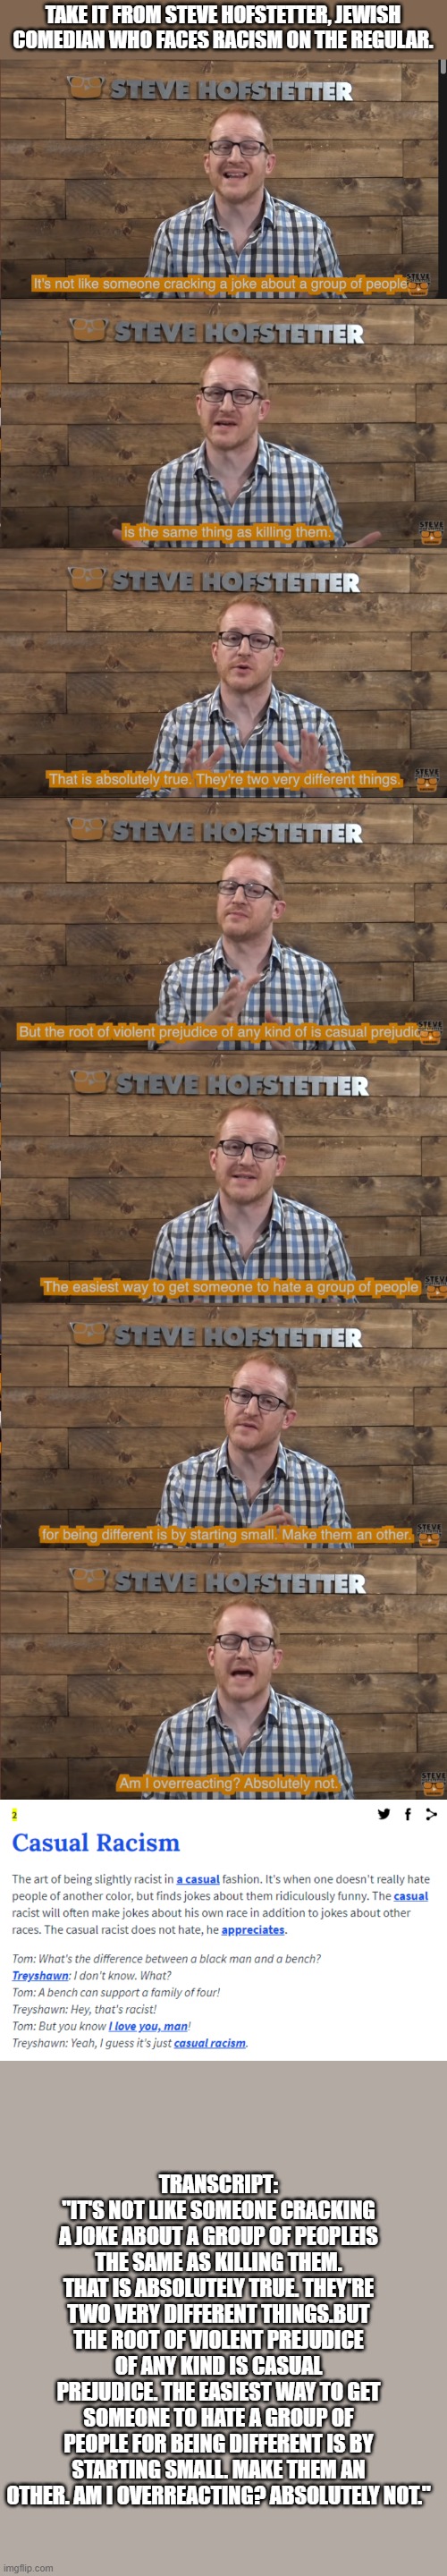 Seeing someone partake in racial humor? This might help them understand why that's not okay. | TAKE IT FROM STEVE HOFSTETTER, JEWISH COMEDIAN WHO FACES RACISM ON THE REGULAR. TRANSCRIPT:
"IT'S NOT LIKE SOMEONE CRACKING A JOKE ABOUT A GROUP OF PEOPLEIS THE SAME AS KILLING THEM. THAT IS ABSOLUTELY TRUE. THEY'RE TWO VERY DIFFERENT THINGS.BUT THE ROOT OF VIOLENT PREJUDICE OF ANY KIND IS CASUAL PREJUDICE. THE EASIEST WAY TO GET SOMEONE TO HATE A GROUP OF PEOPLE FOR BEING DIFFERENT IS BY STARTING SMALL. MAKE THEM AN OTHER. AM I OVERREACTING? ABSOLUTELY NOT." | image tagged in racist,humor,meme,steve hofstetter,jewish comedian,politicstoo | made w/ Imgflip meme maker